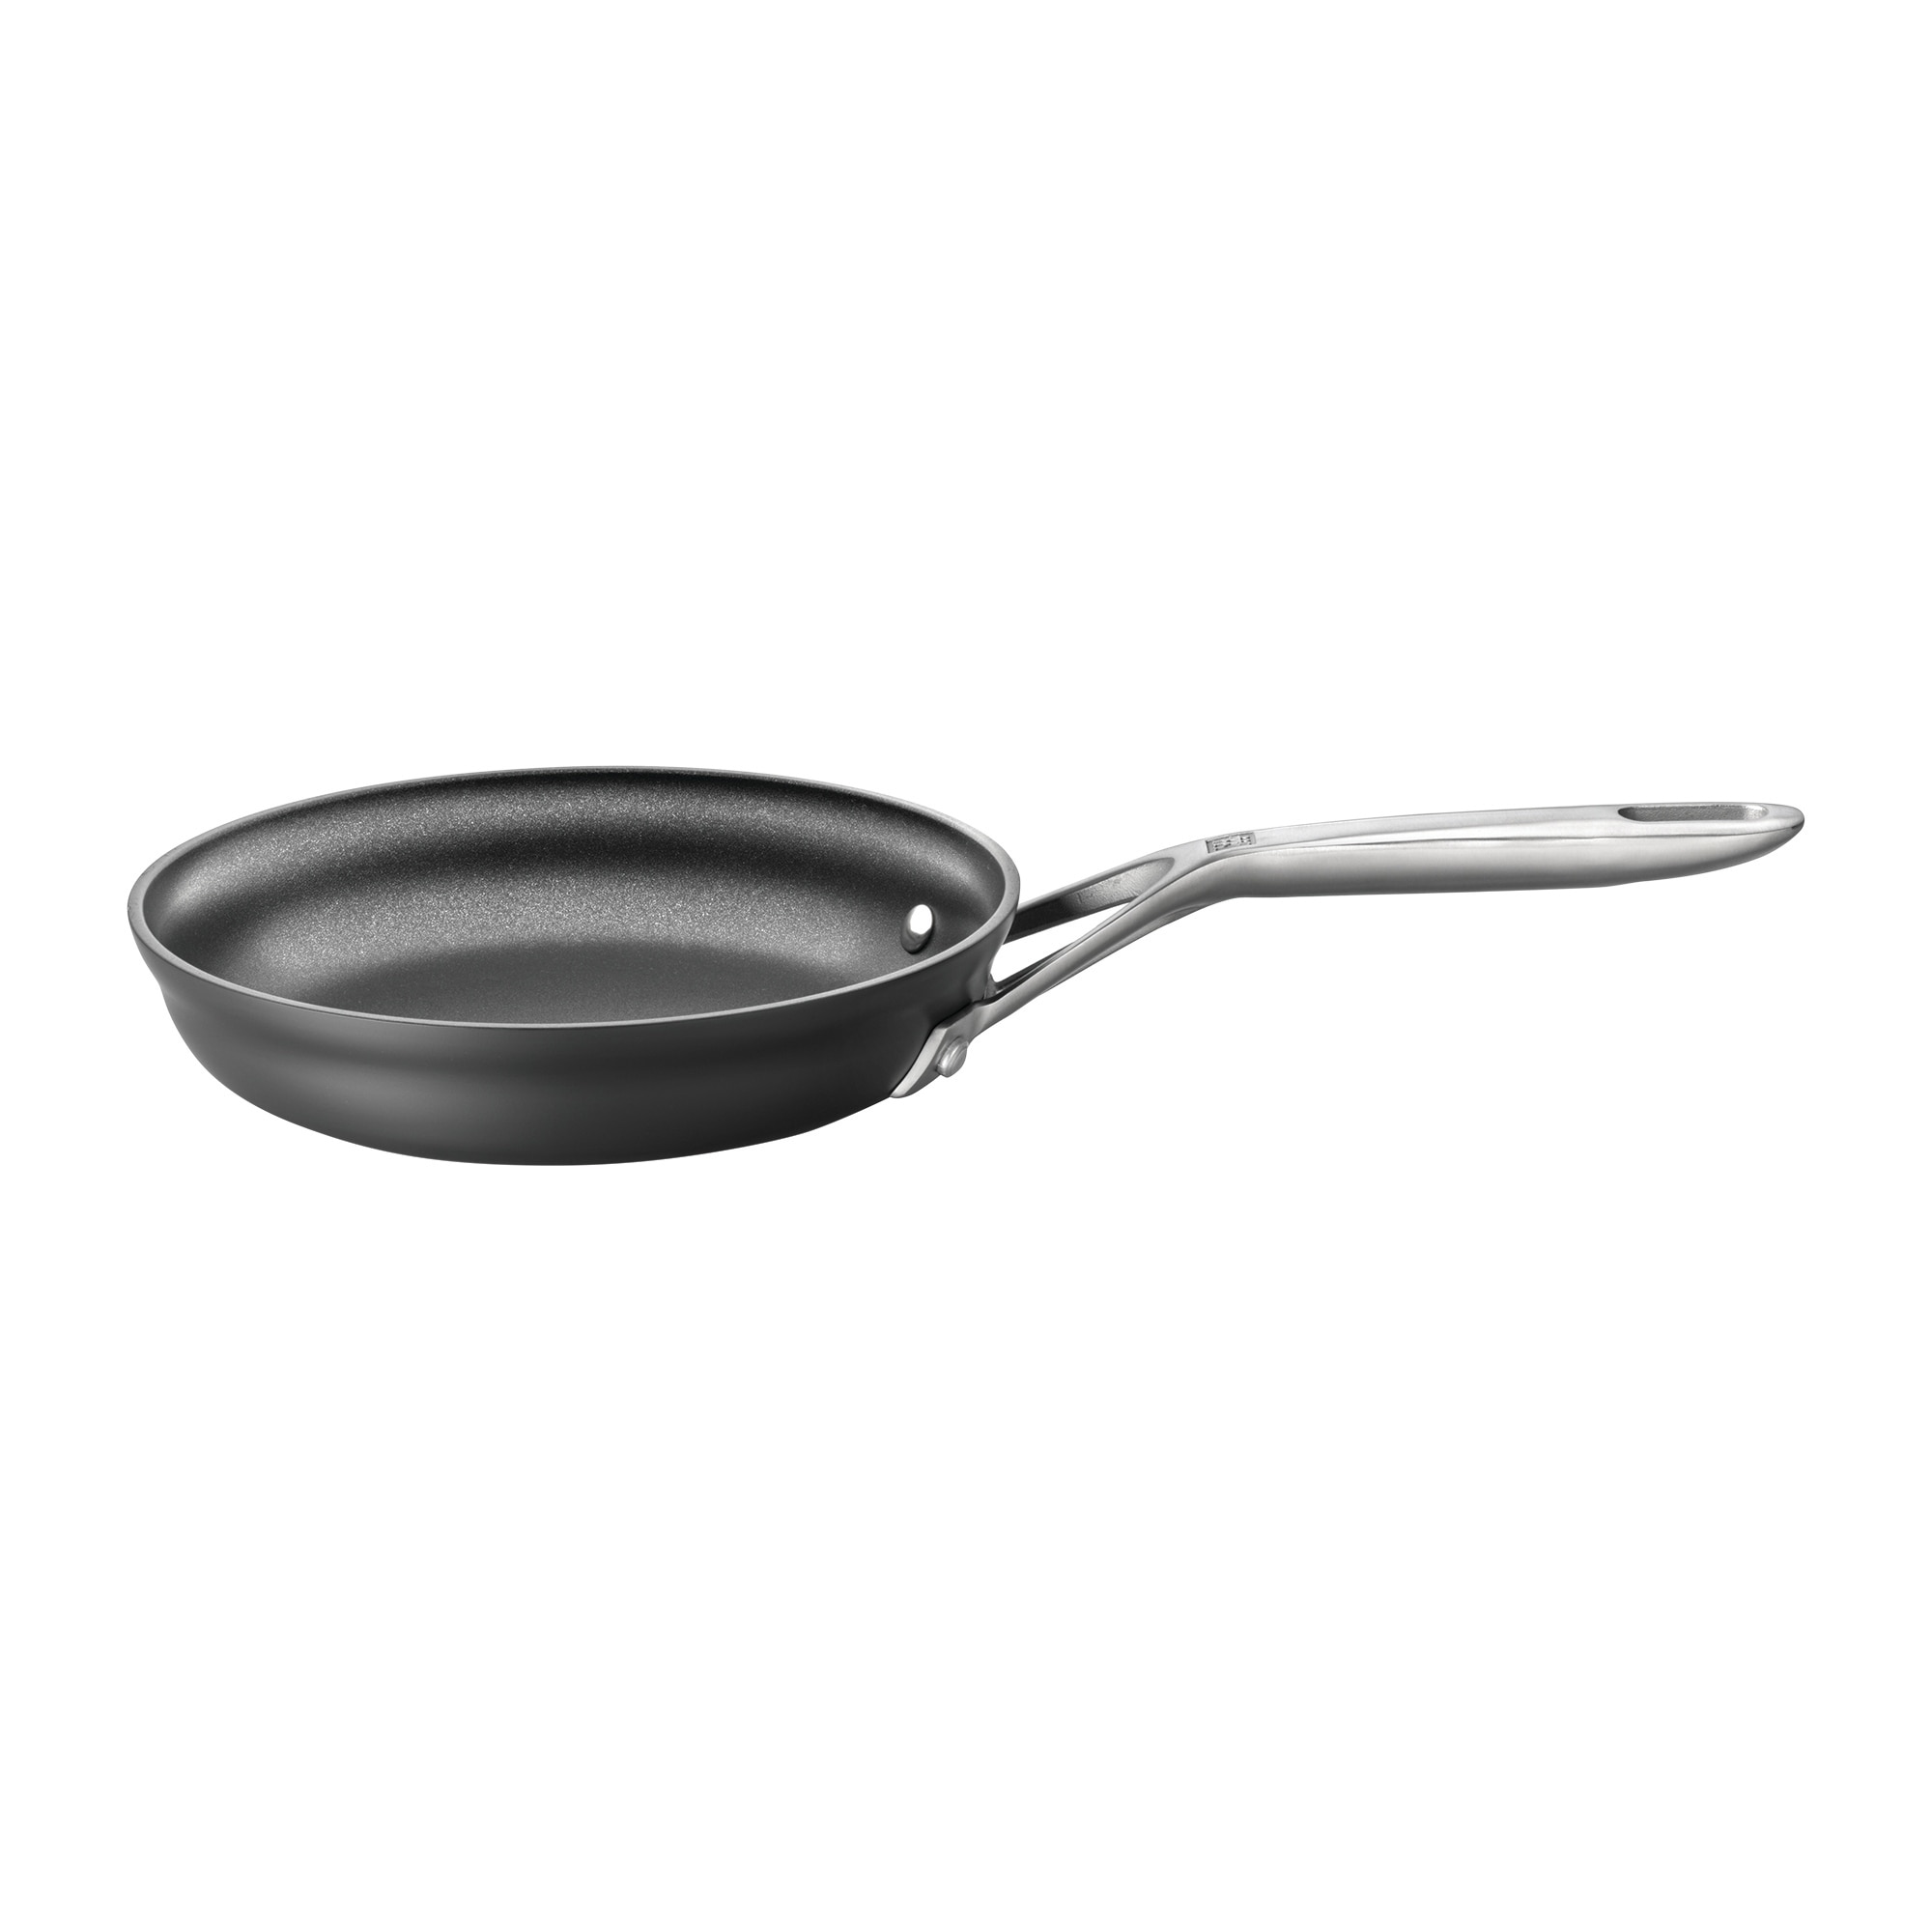 ELENA - Set of 3 Non-stick Smeralda Fry Pans with lids, 20, 24 and